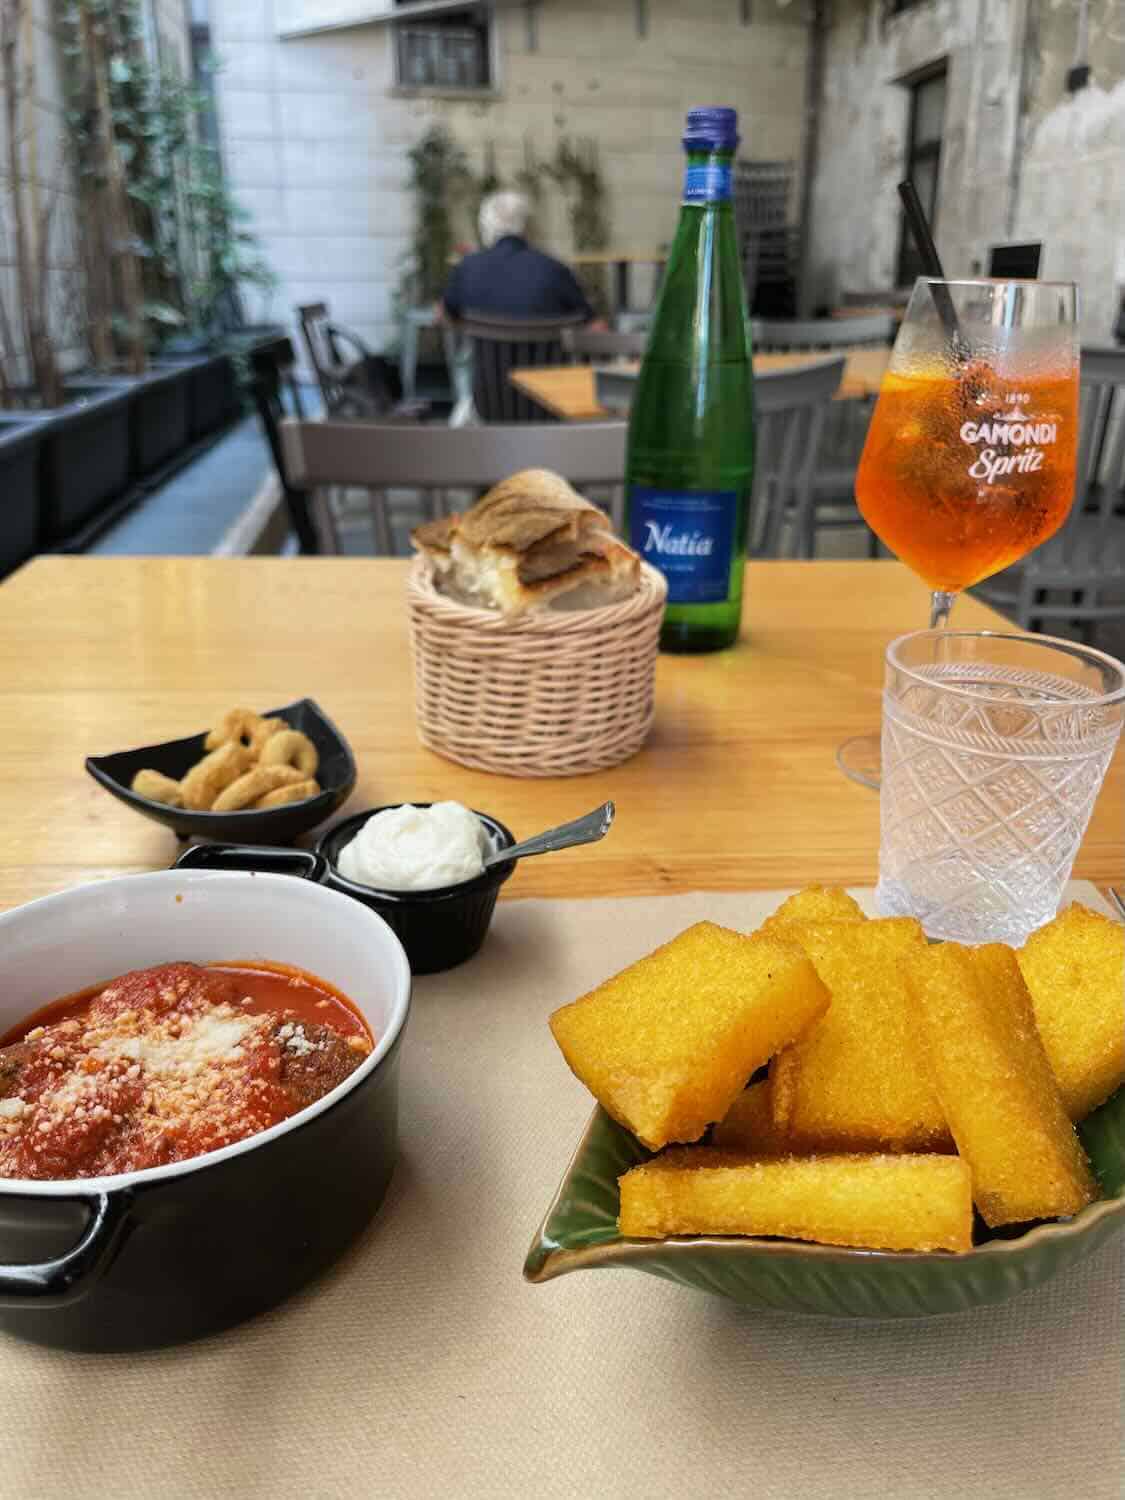 A table set with an assortment of Italian foods, including a dish of meatballs in tomato sauce, a plate of fried polenta sticks, a small bowl of cream, and a basket of bread. A glass of Aperol Spritz and a bottle of sparkling water are also on the table, with an outdoor café setting in the background.